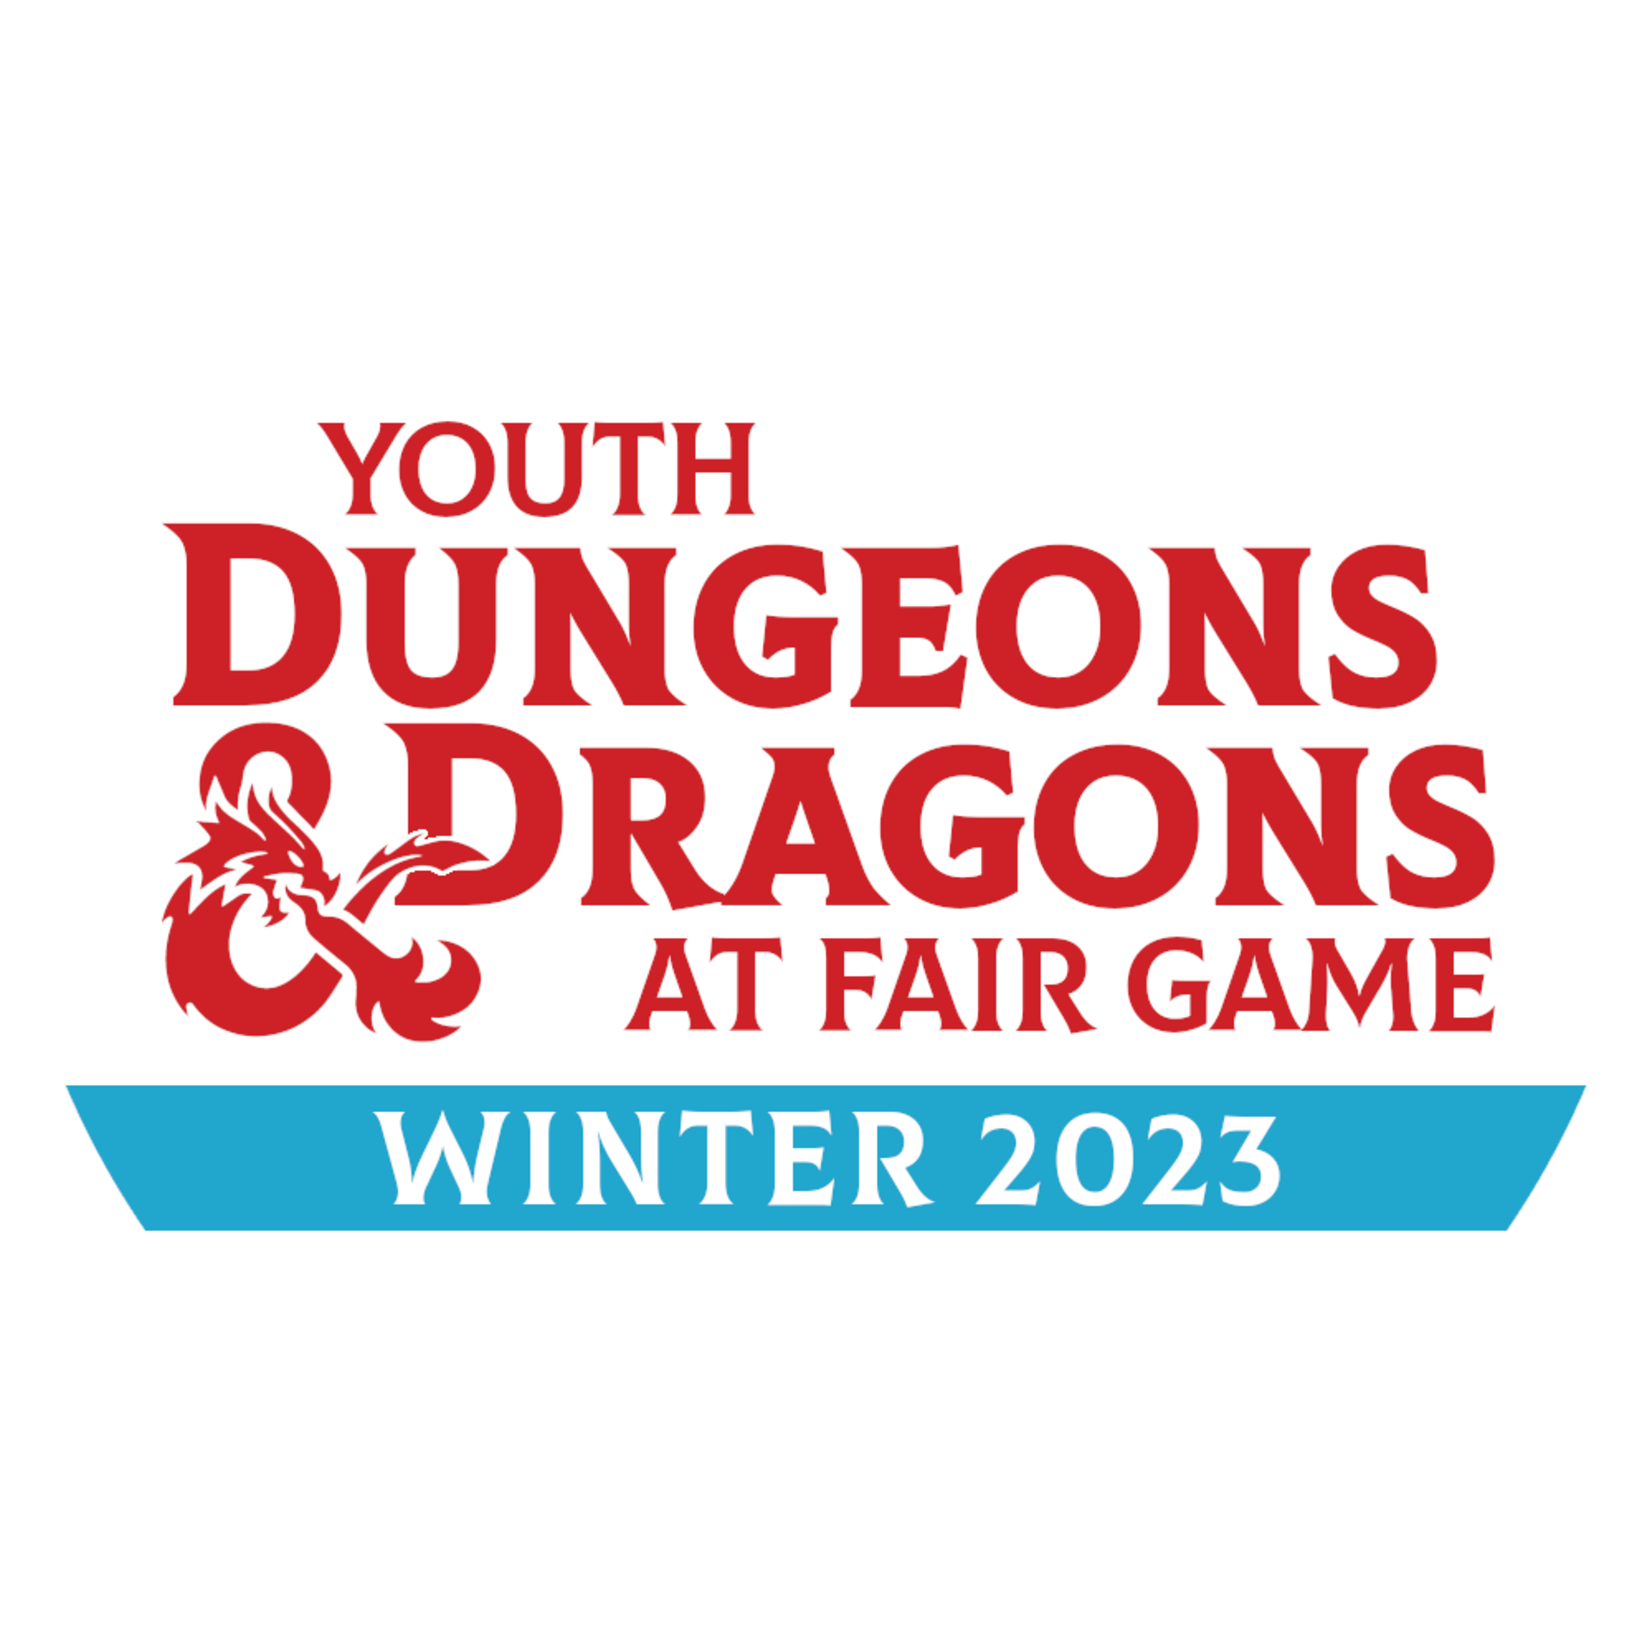 Fair Game YDND Winter 2023: Group DX1 - Tuesdays Downers Grove 4-6 PM (Ages 8-13)